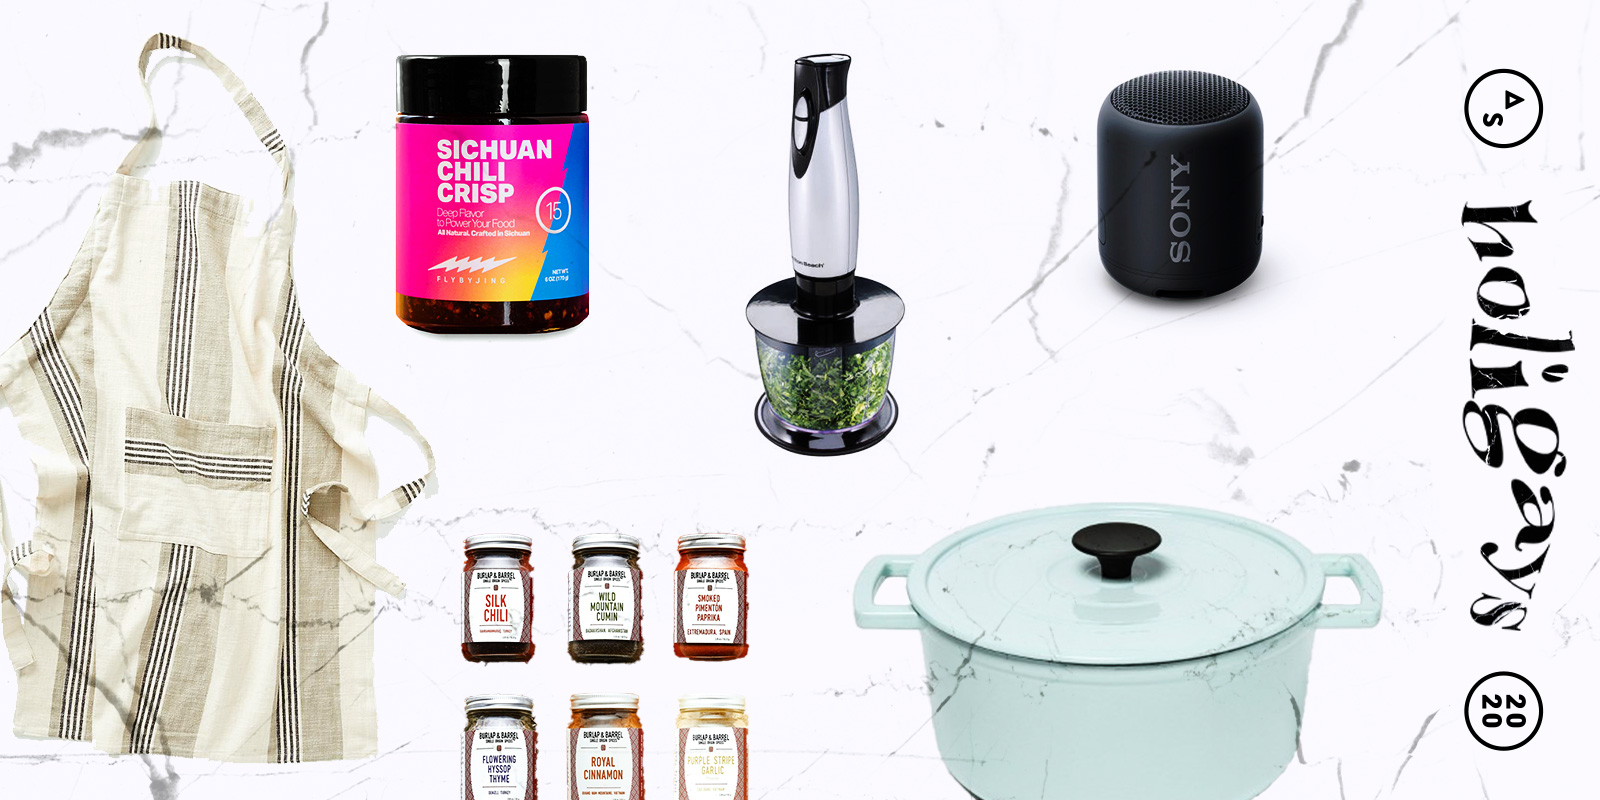 A collage of gifts you can buy for a reluctant pandemic chef, including: An apron, a hand blender, a kitchen speaker, a Dutchmen oven, and a variety of spices.